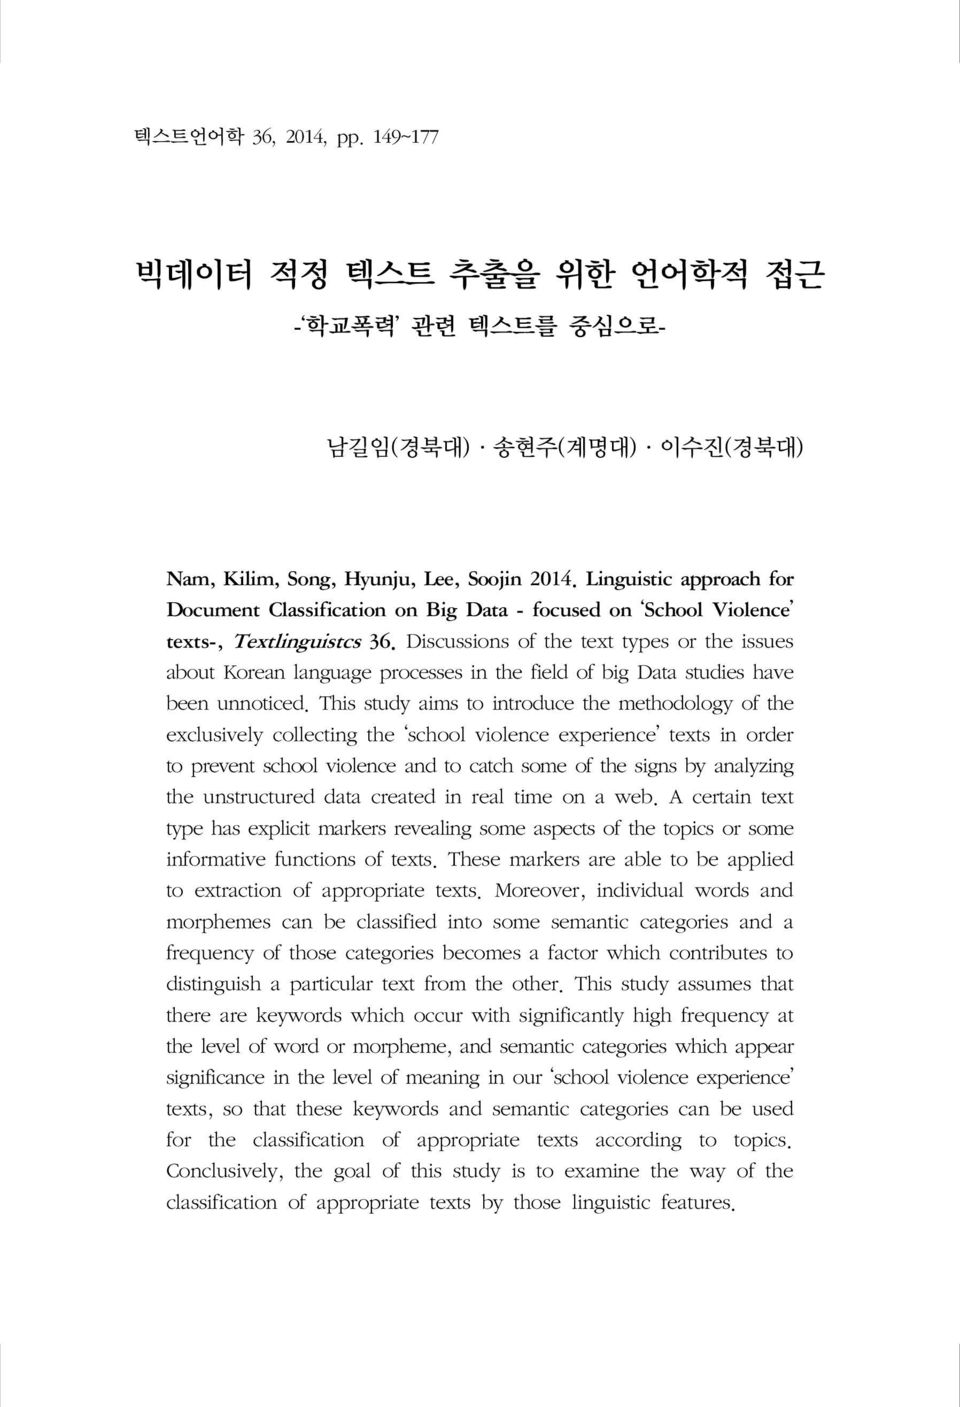 Discussions of the text types or the issues about Korean language processes in the field of big Data studies have been unnoticed.